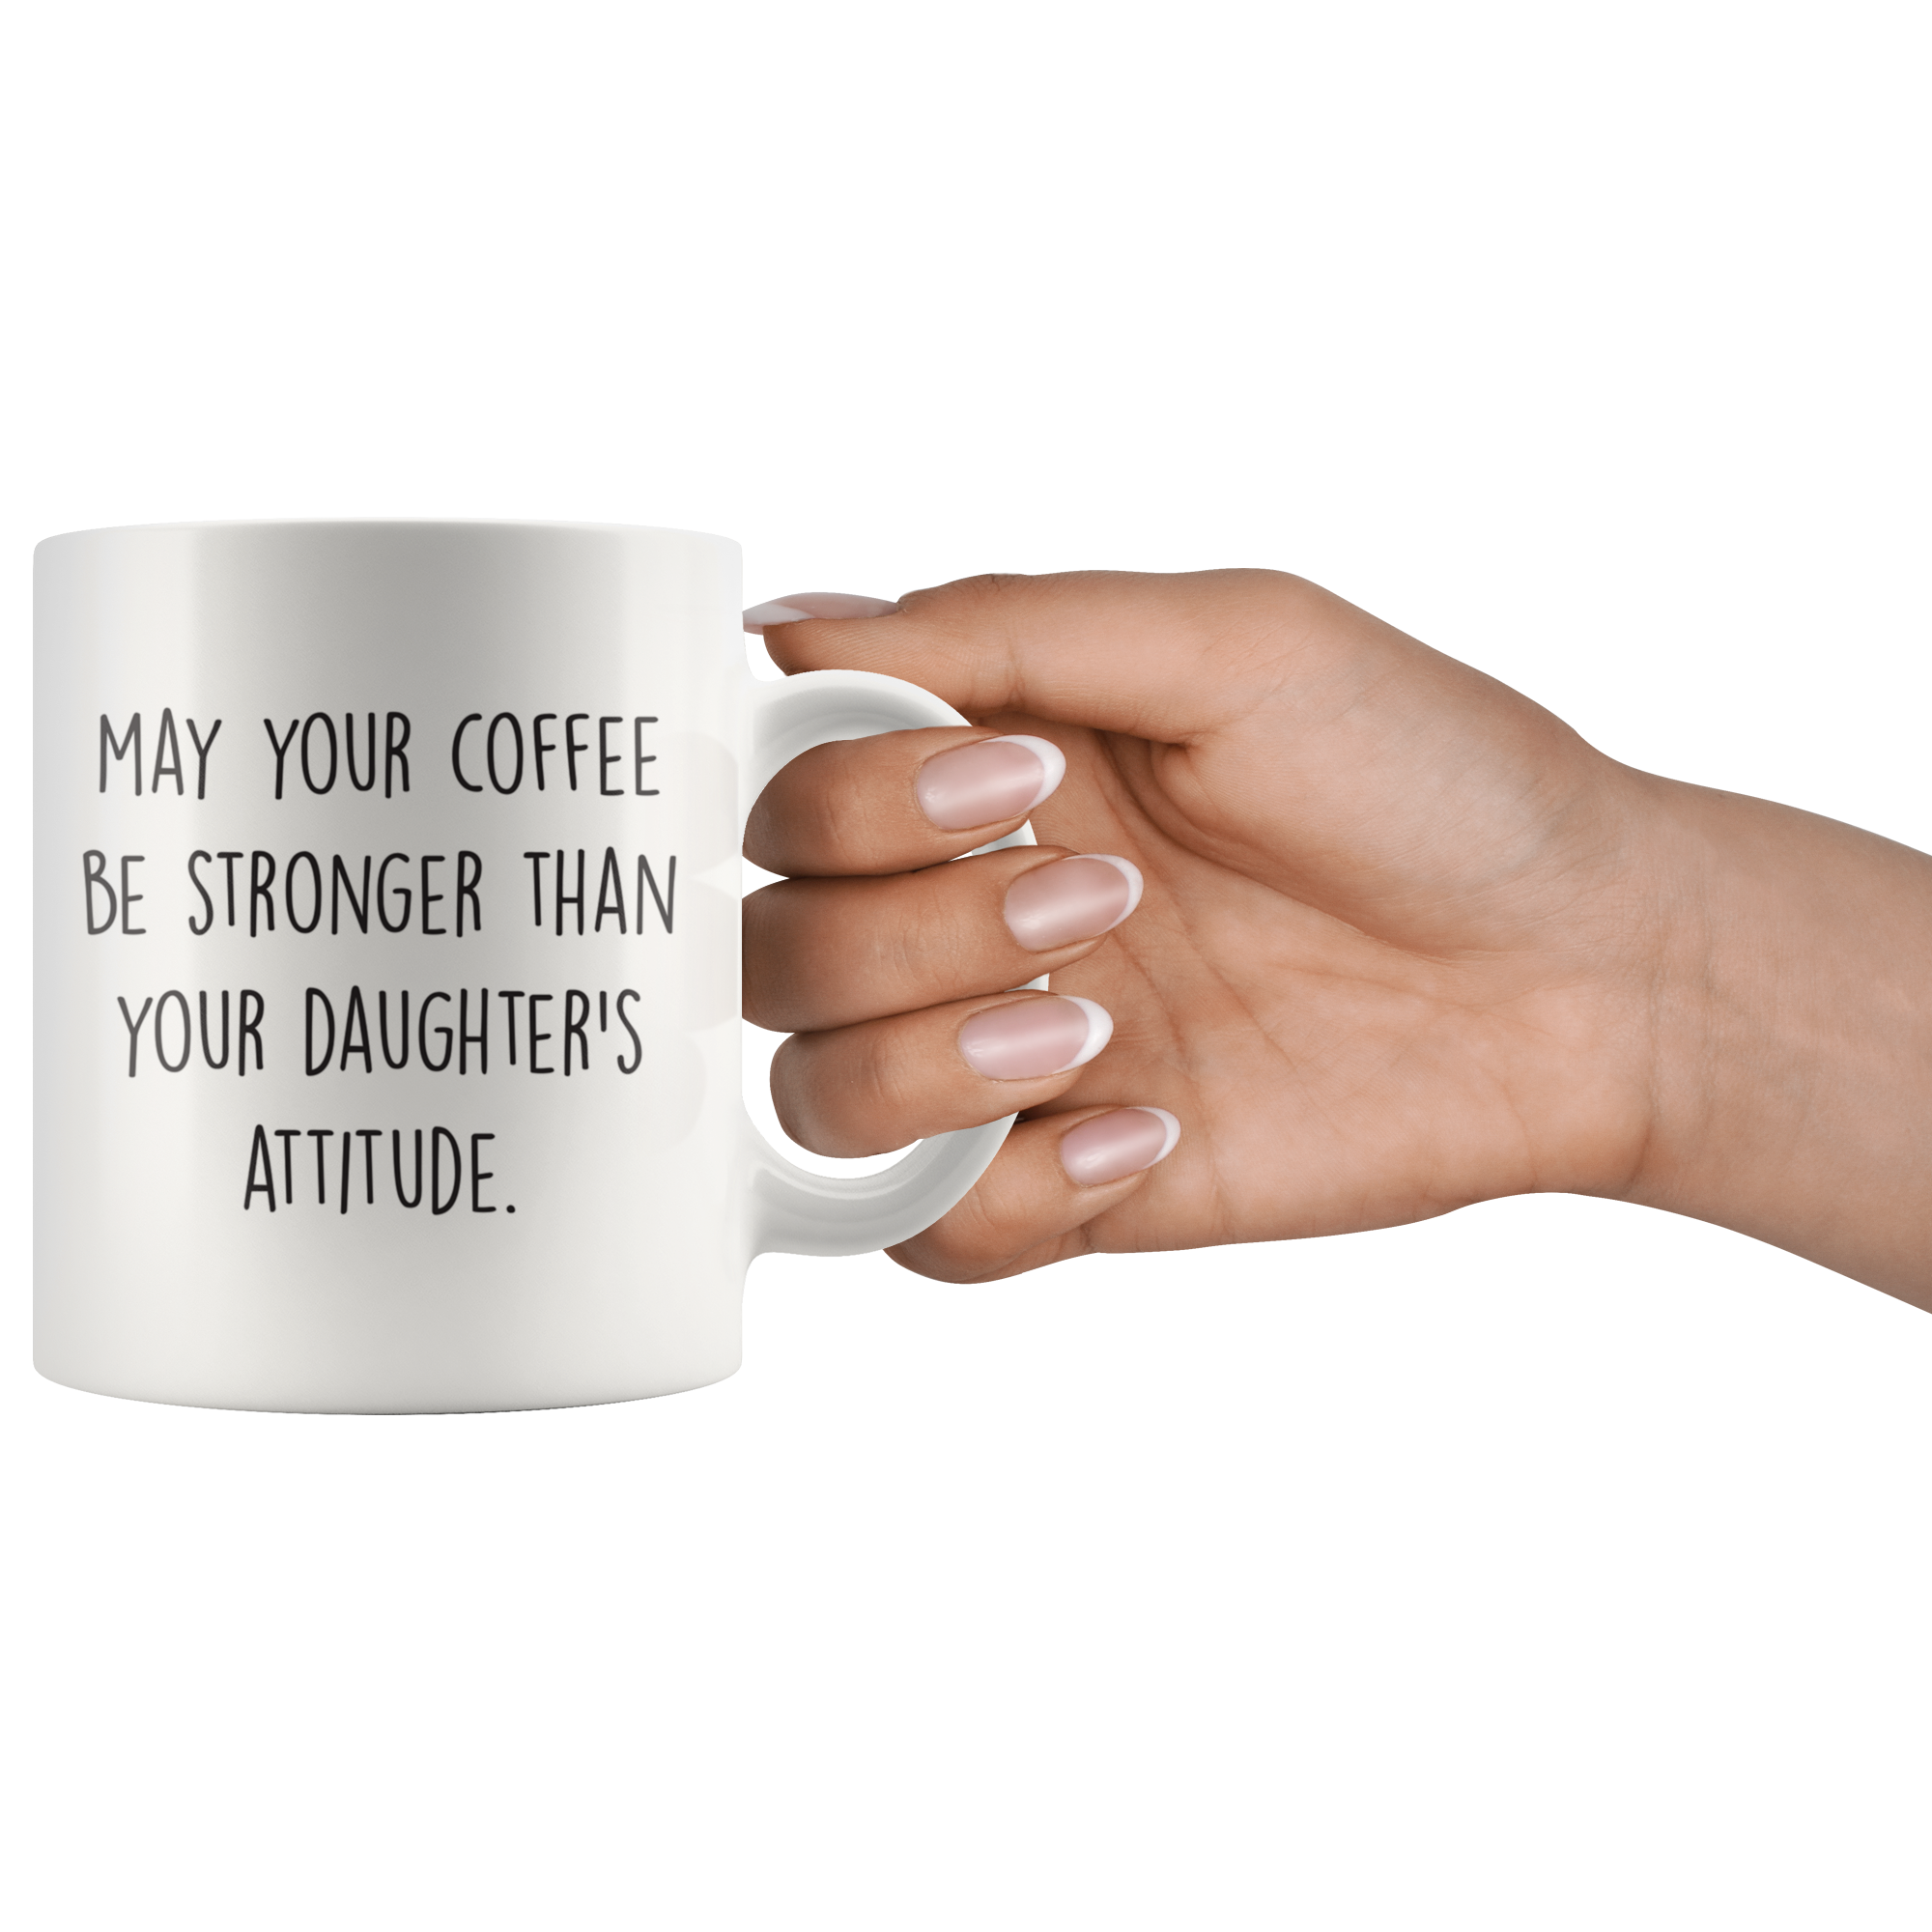 Stronger Coffee Than Your Daughters Attitude Coffee Mug